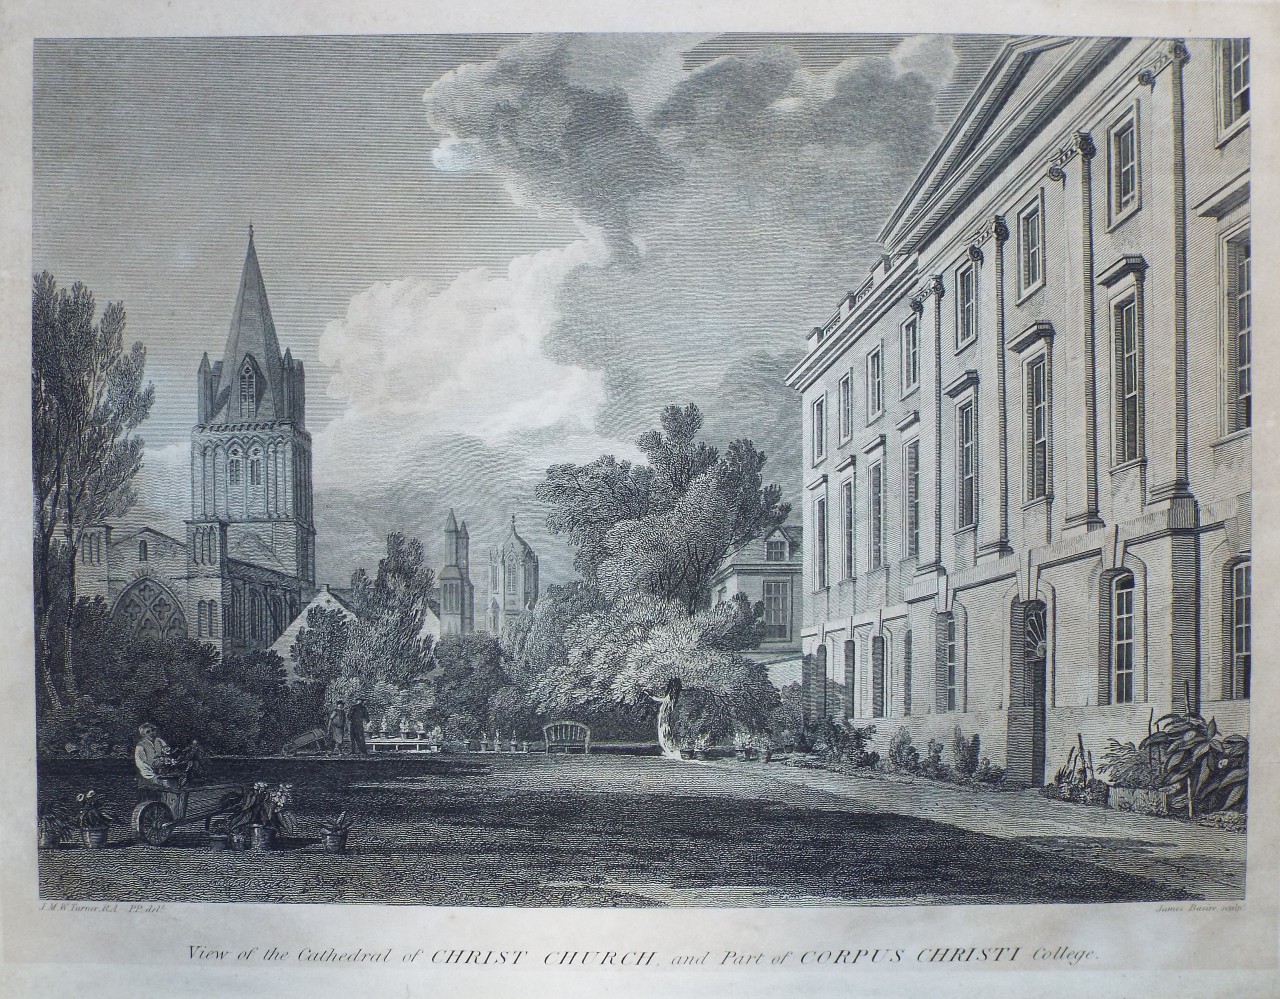 Print - View of the Cathedral of Christ Church and Part of Corpus Christi College. - Basire